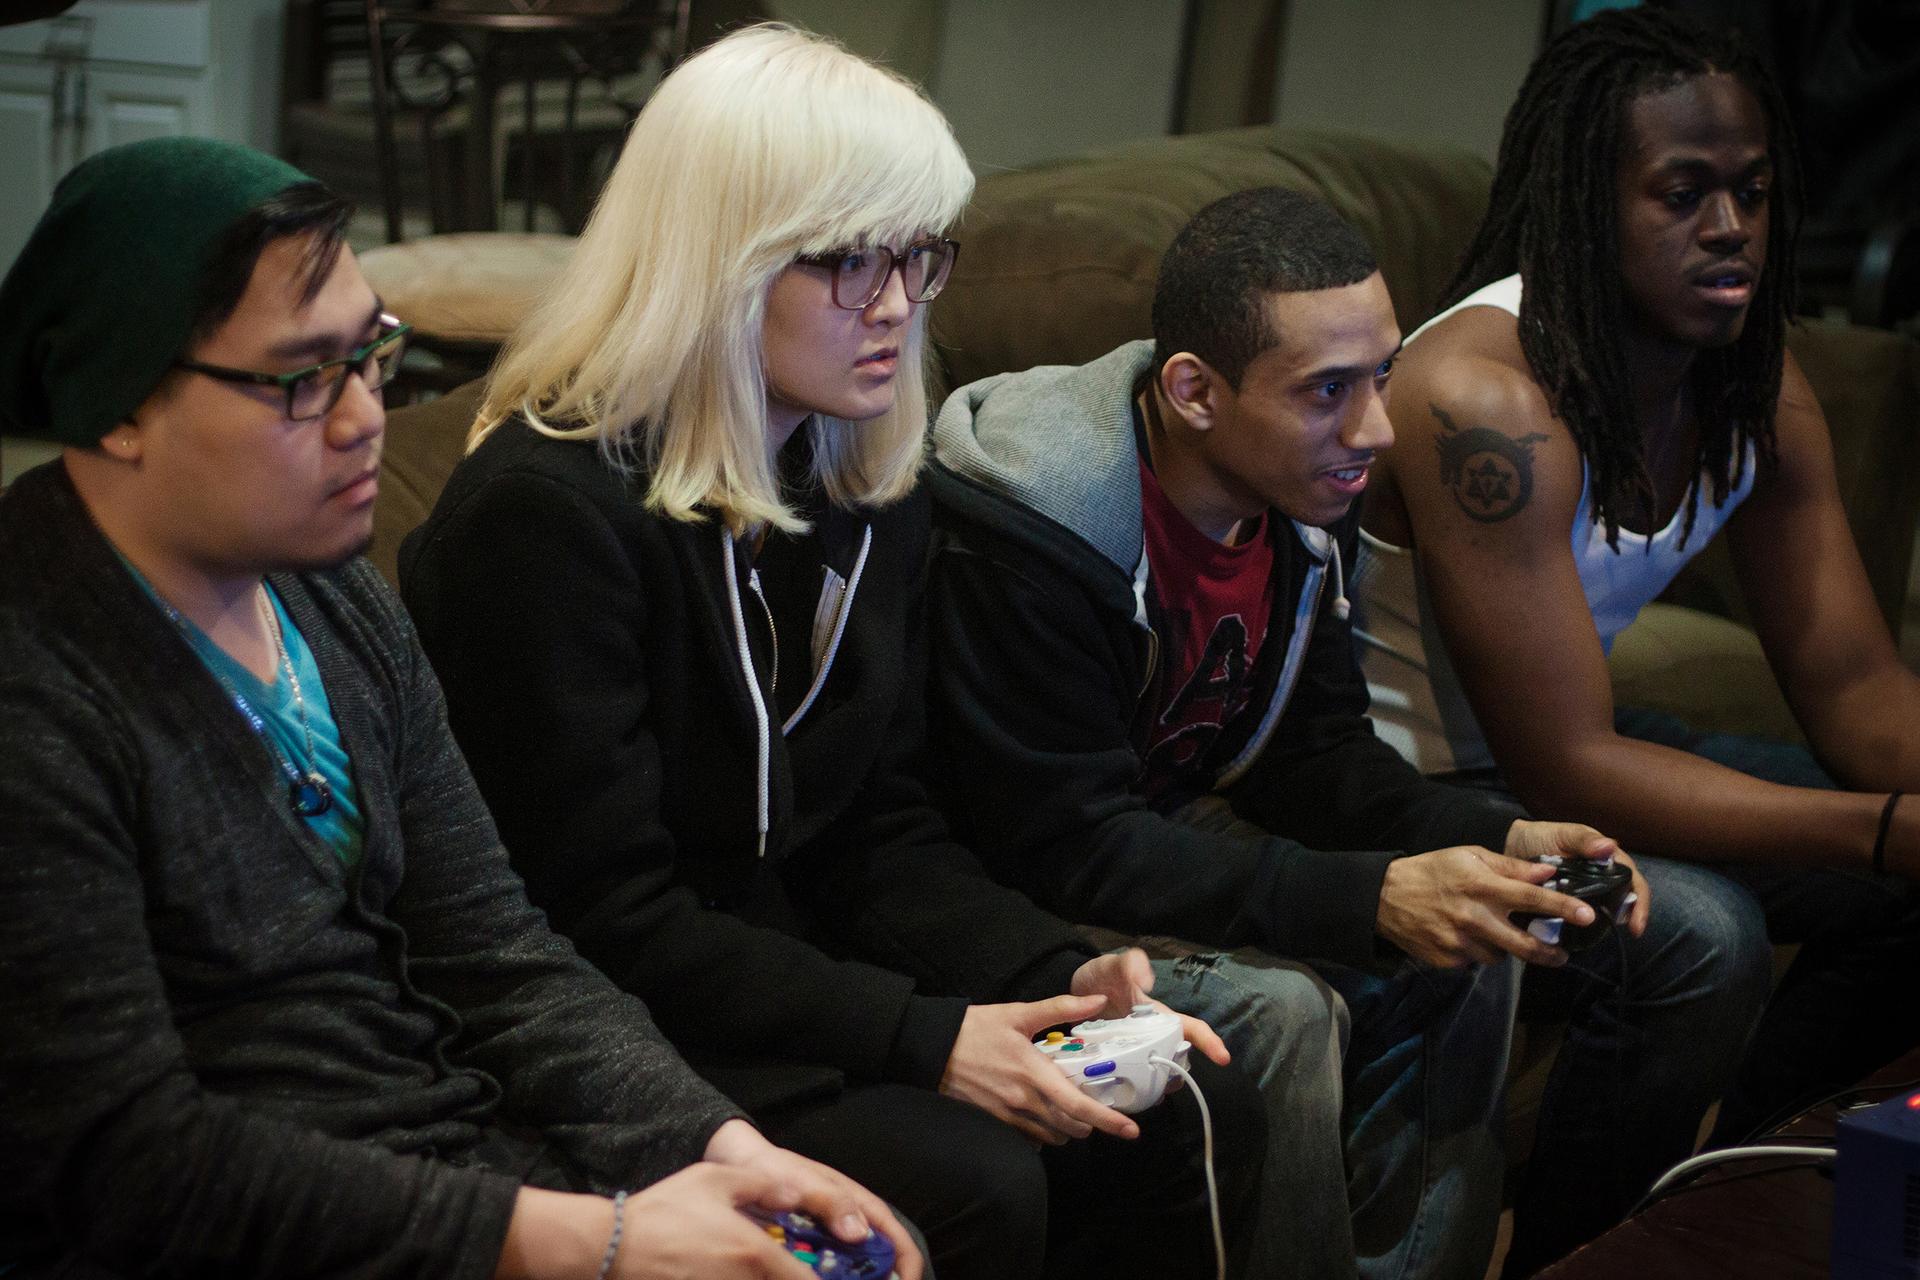 Two two-person teams battle each other in Super Smash Brothers Melee for practice.